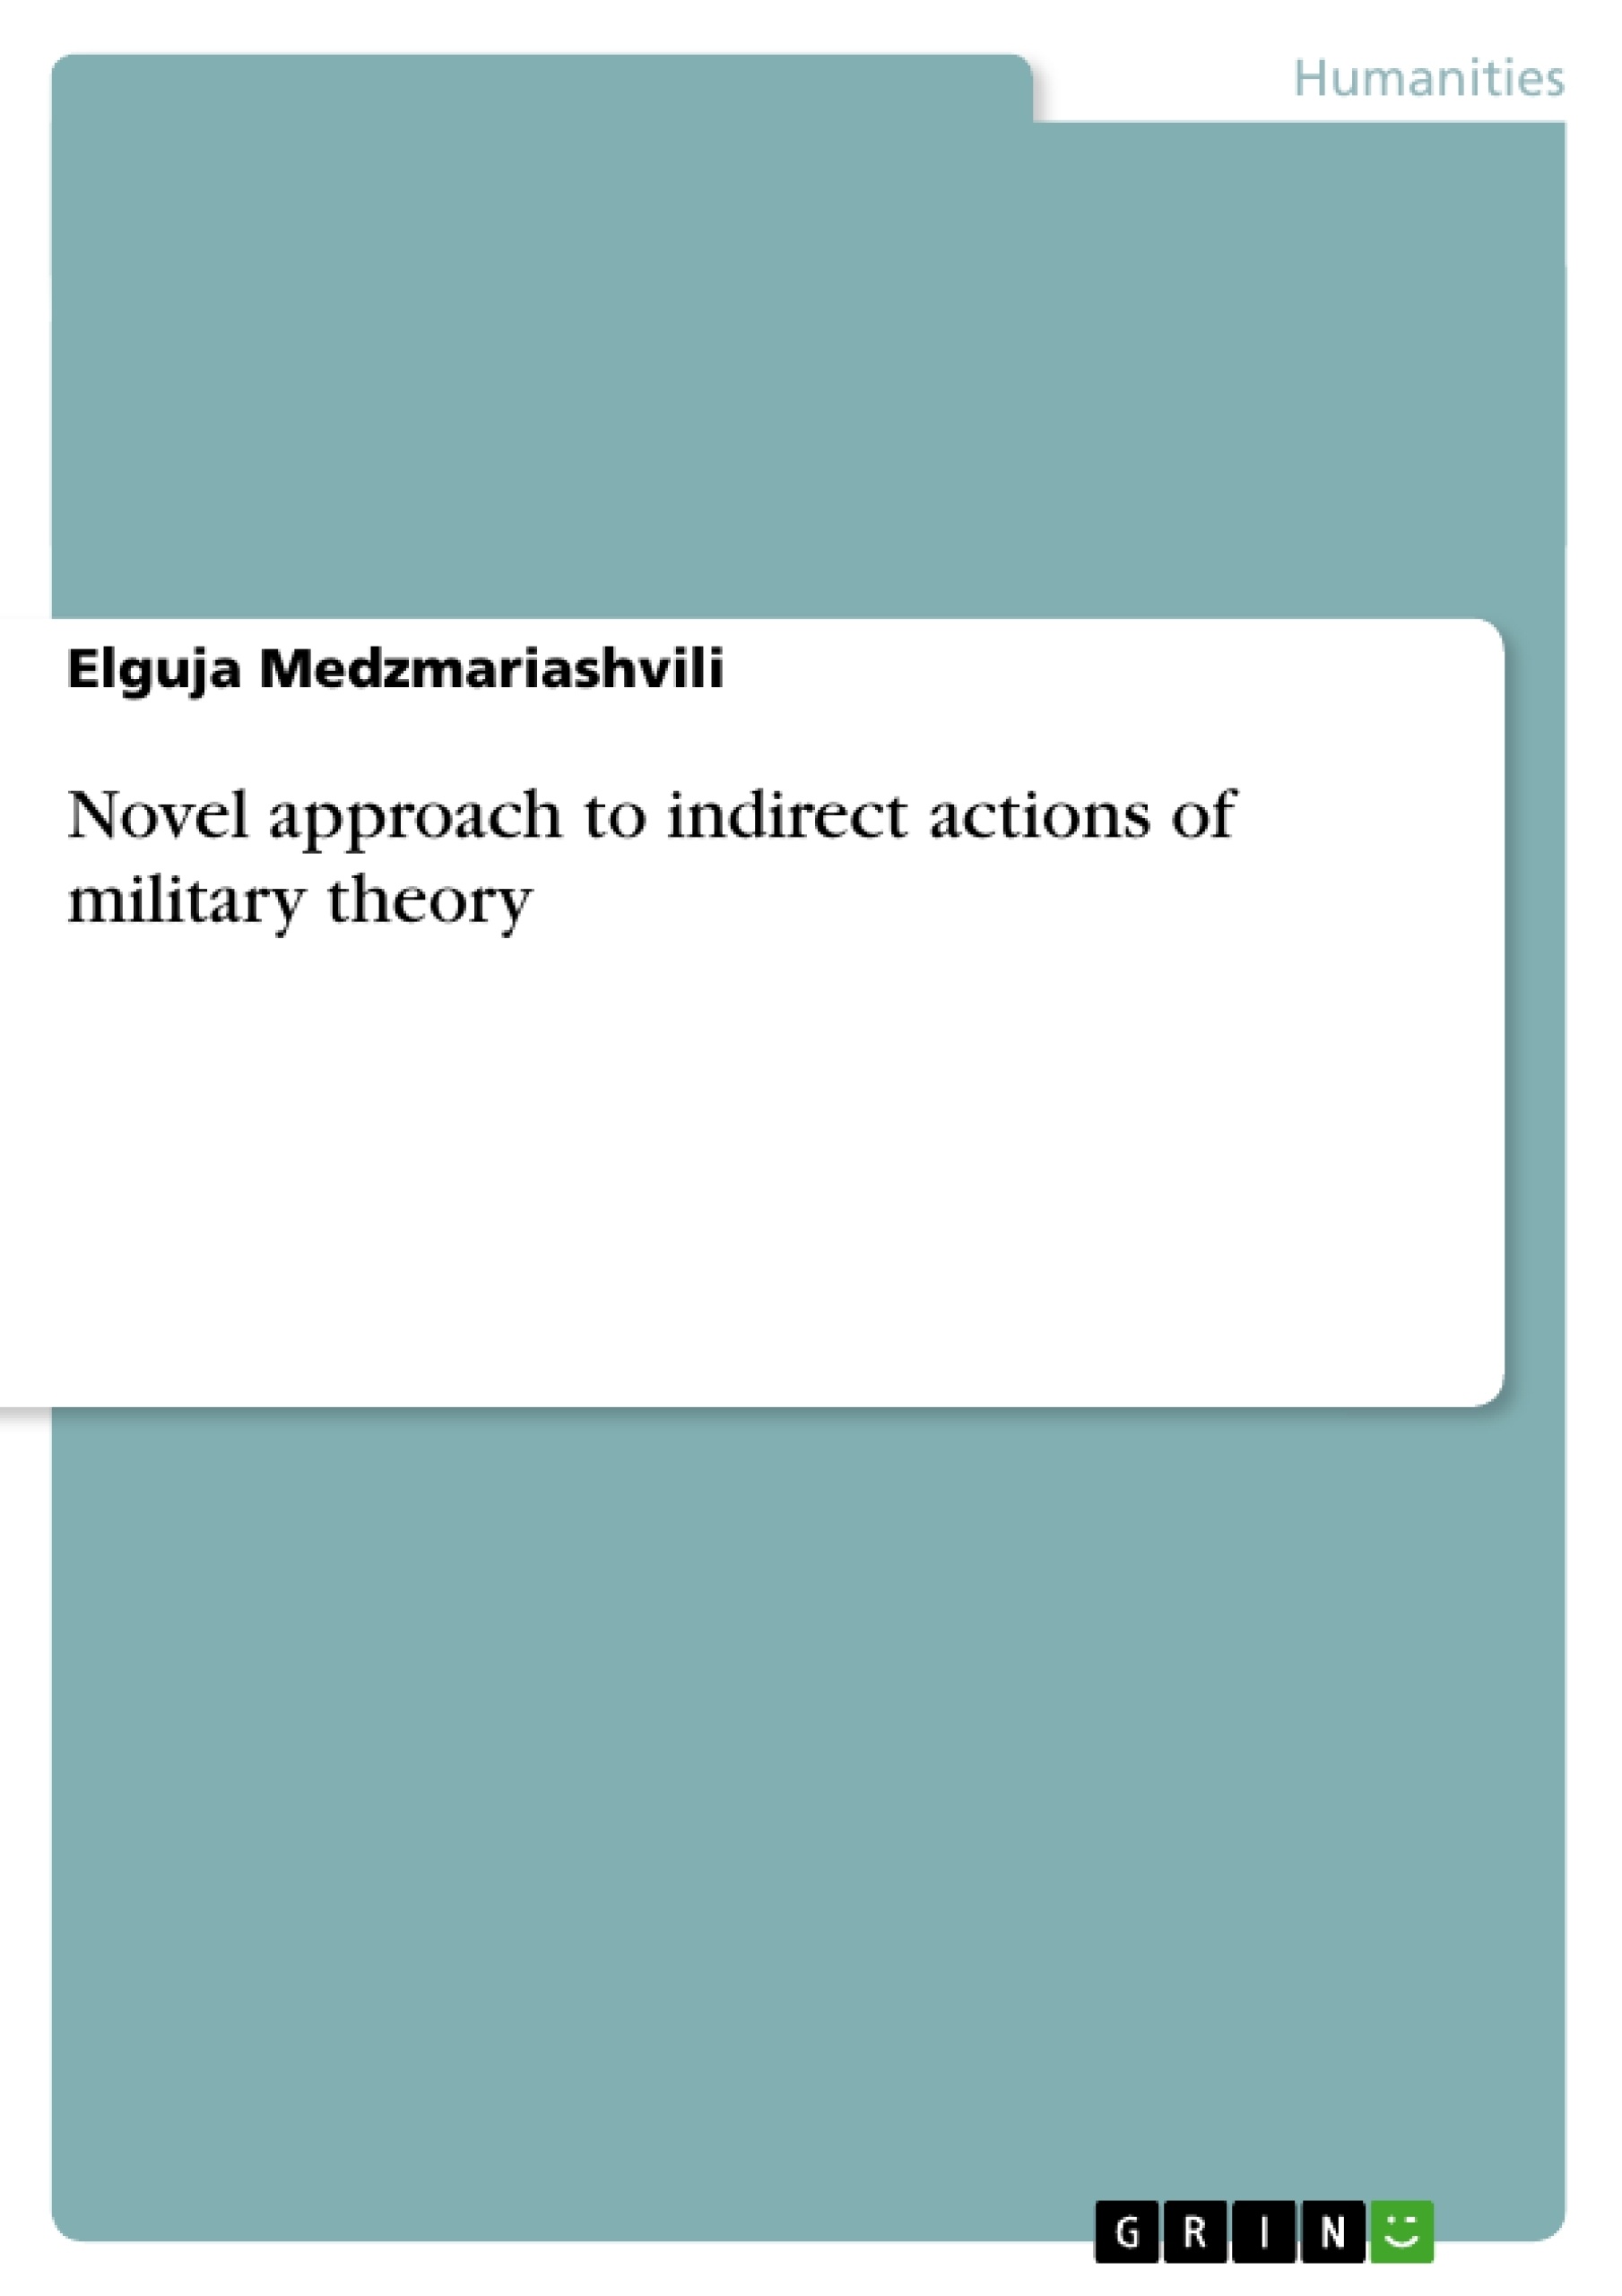 Title: Novel approach to indirect actions of military theory